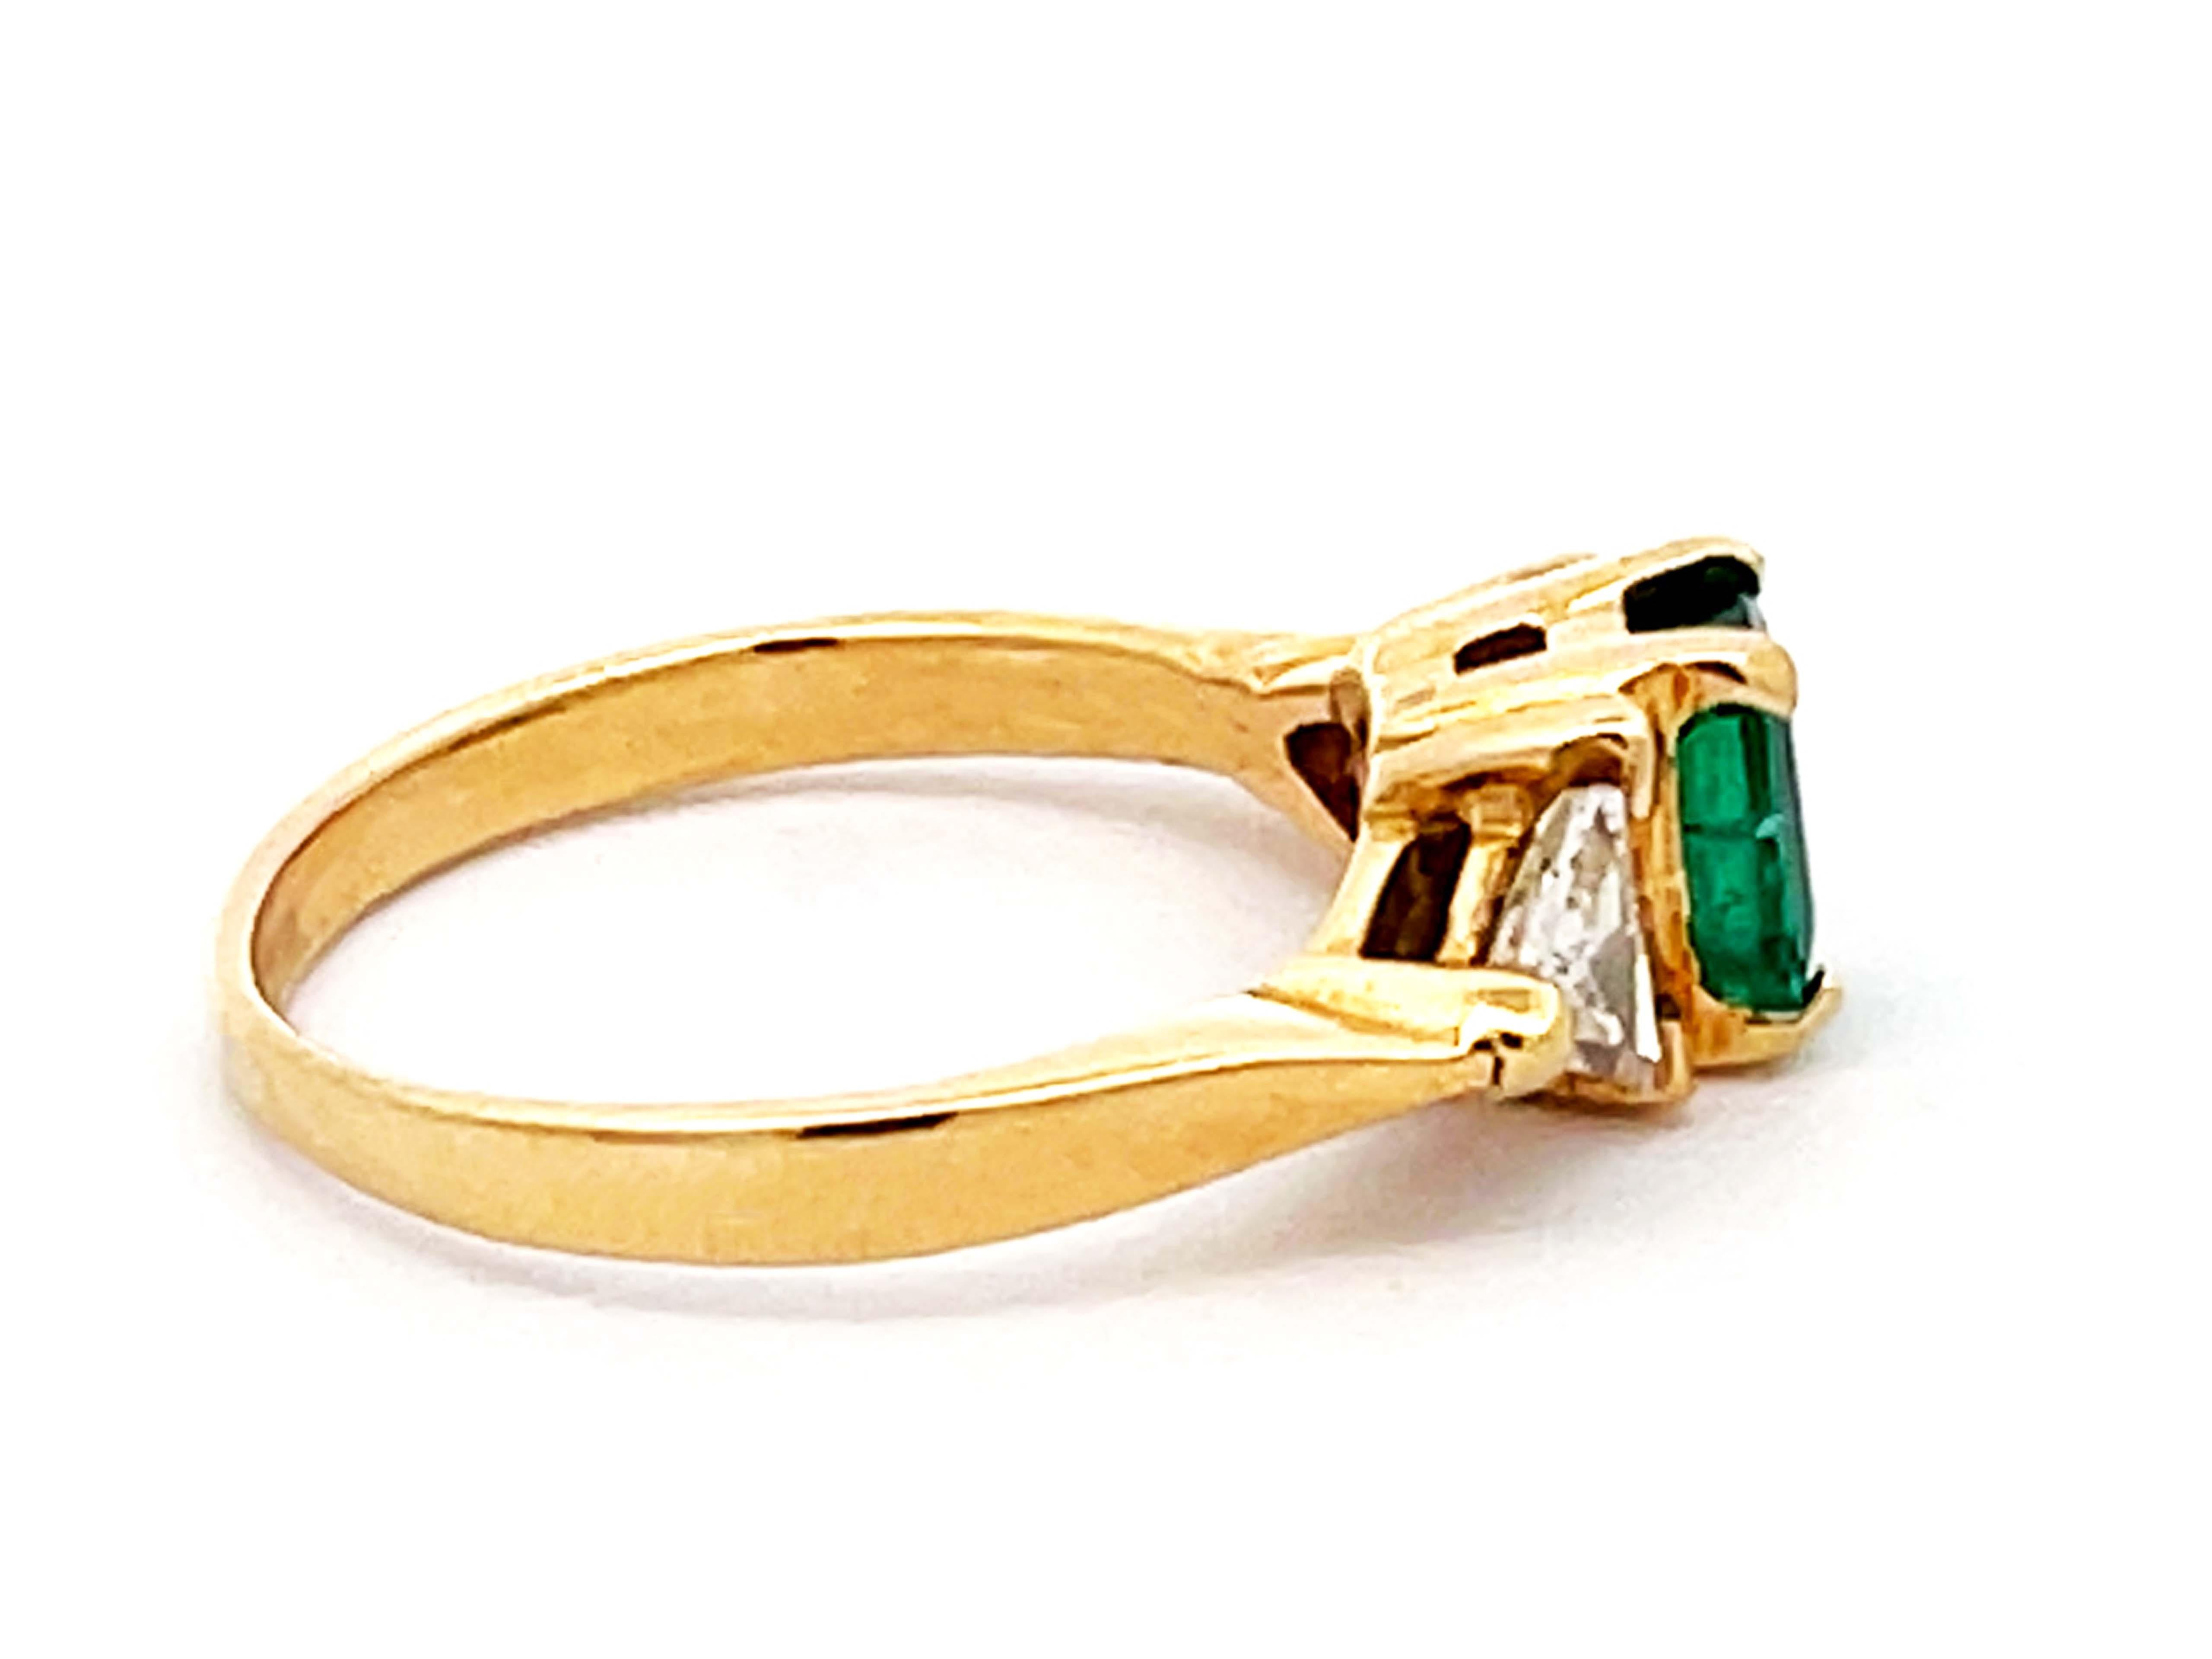 Vintage Green Emerald and Diamond Ring in 14k Yellow Gold In Excellent Condition For Sale In Honolulu, HI